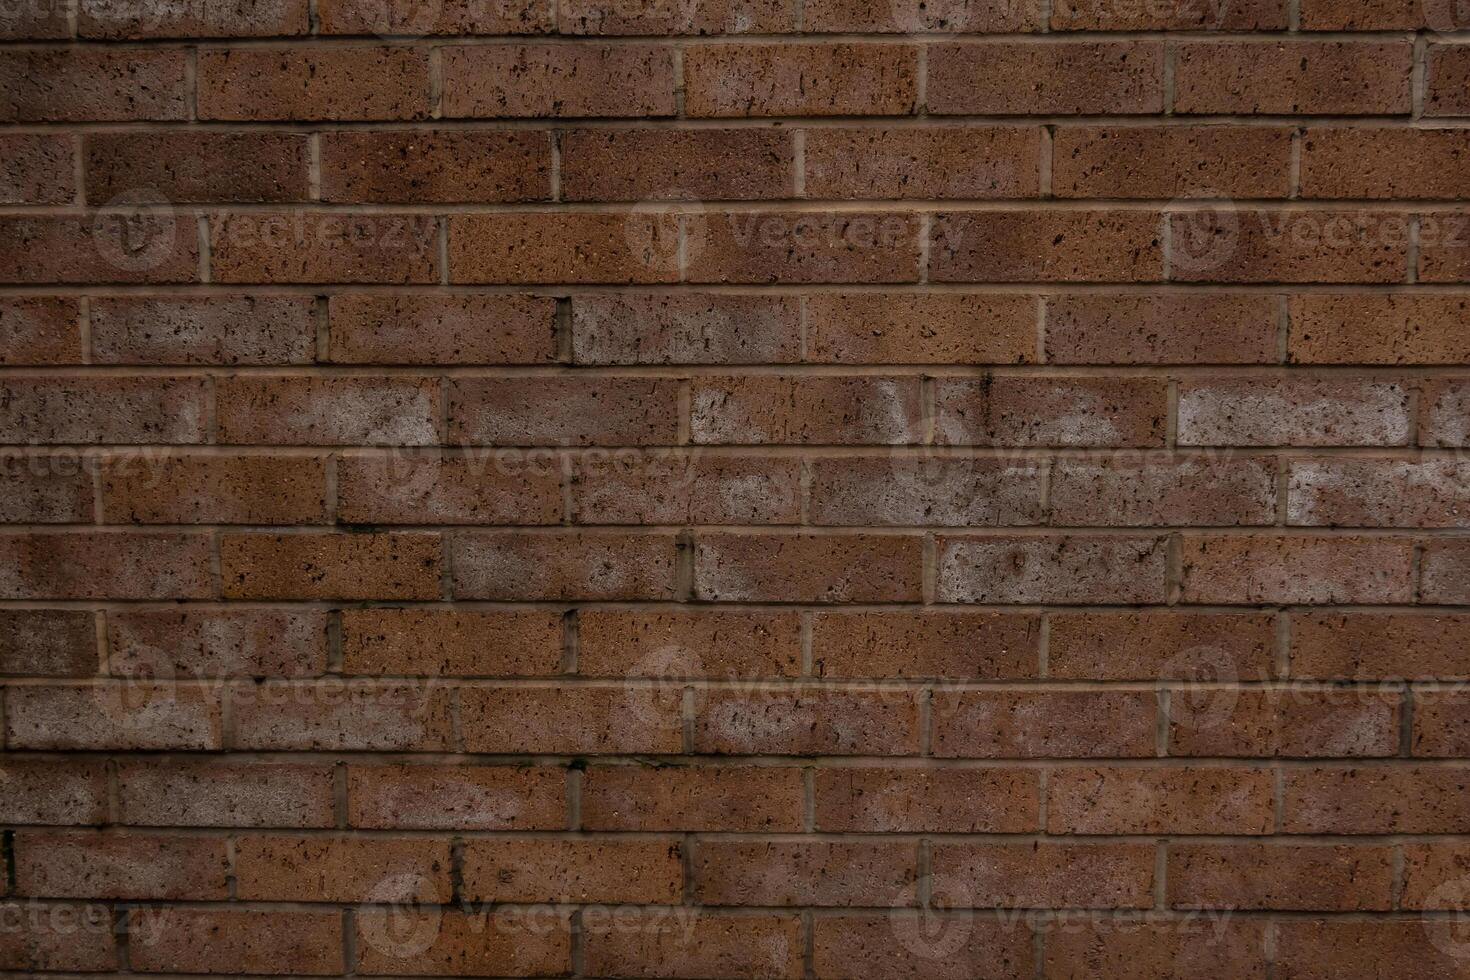 Urban Brown Brick Wall Texture in Aged Construction, Grunge Stone Pattern on Solid Surface, Abstract Old Building Block Background photo